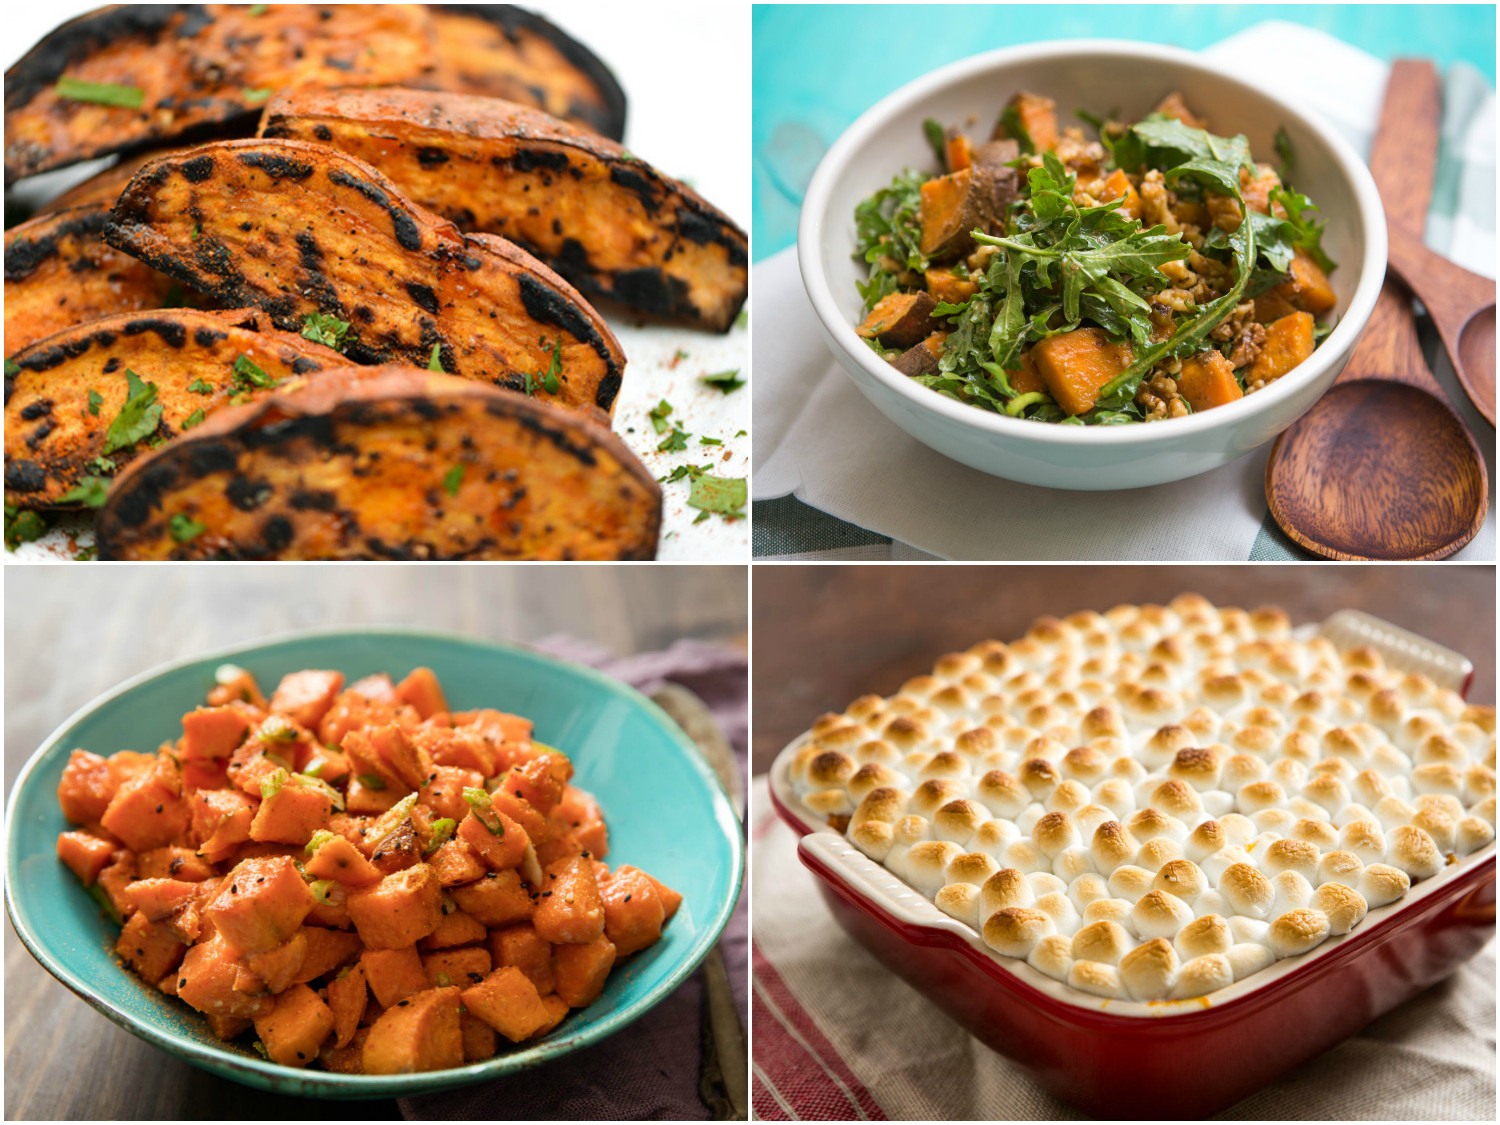 Sweet Potato Recipes For Thanksgiving
 12 Not Too Sweet Sweet Potato Recipes for Thanksgiving